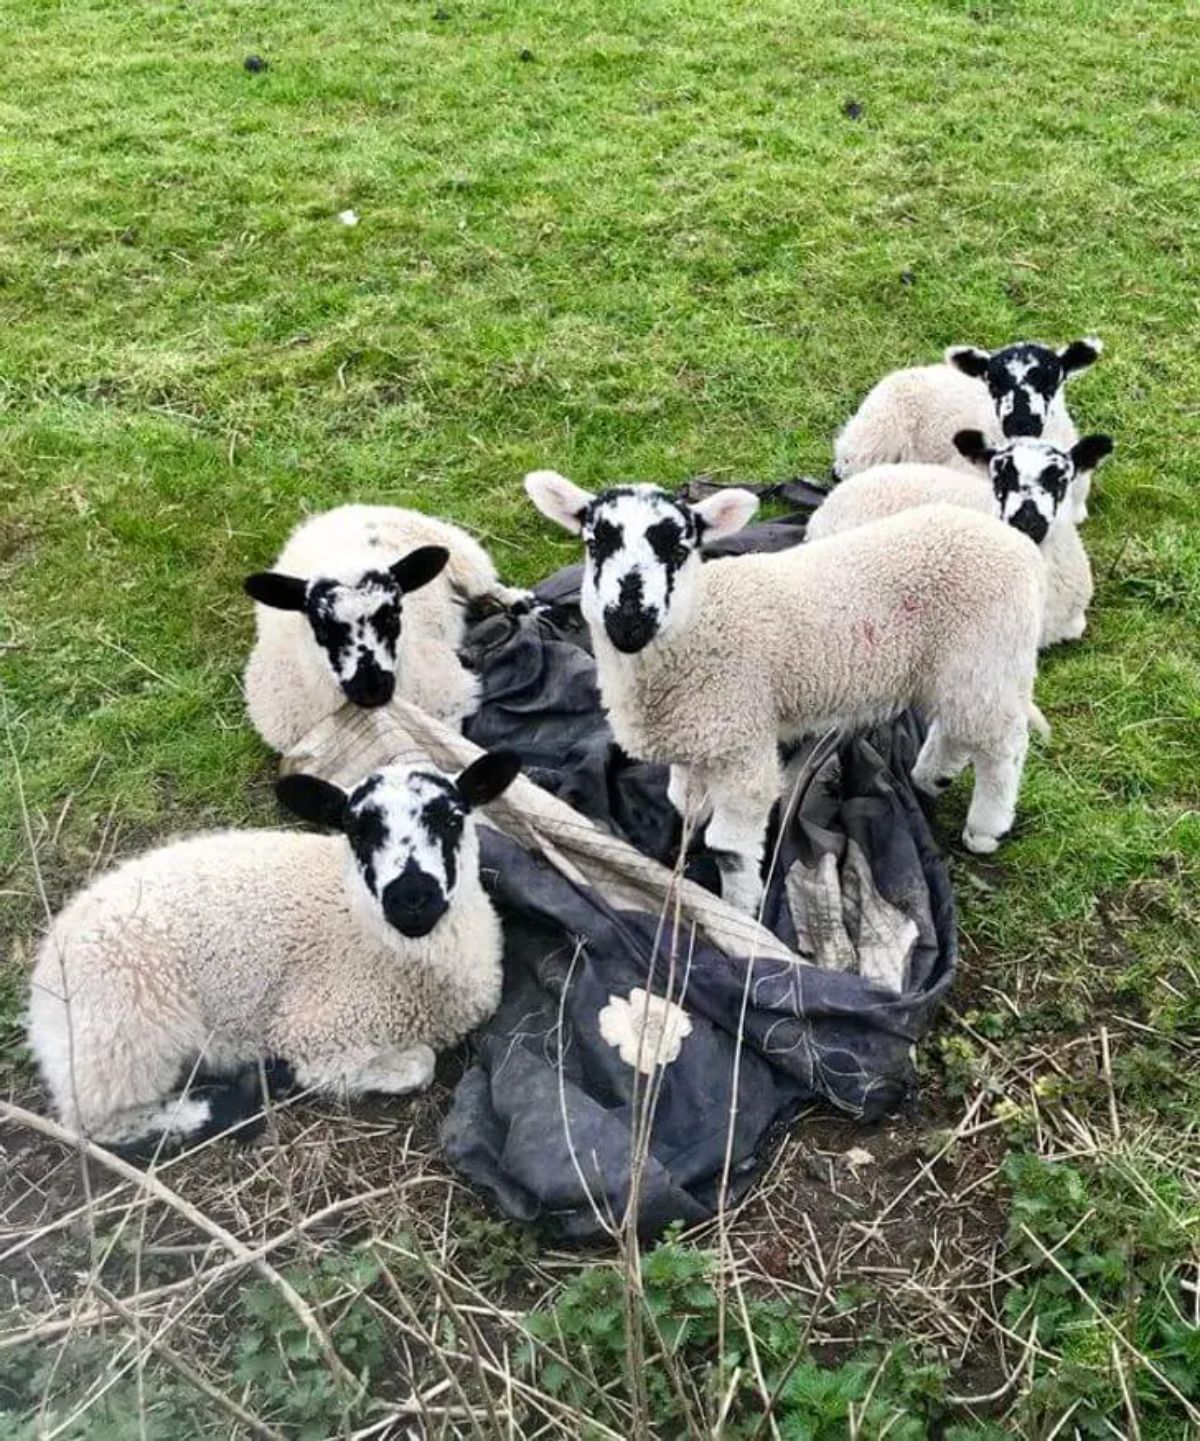 5 white sheep with black markings around the eyes and snout and black ears